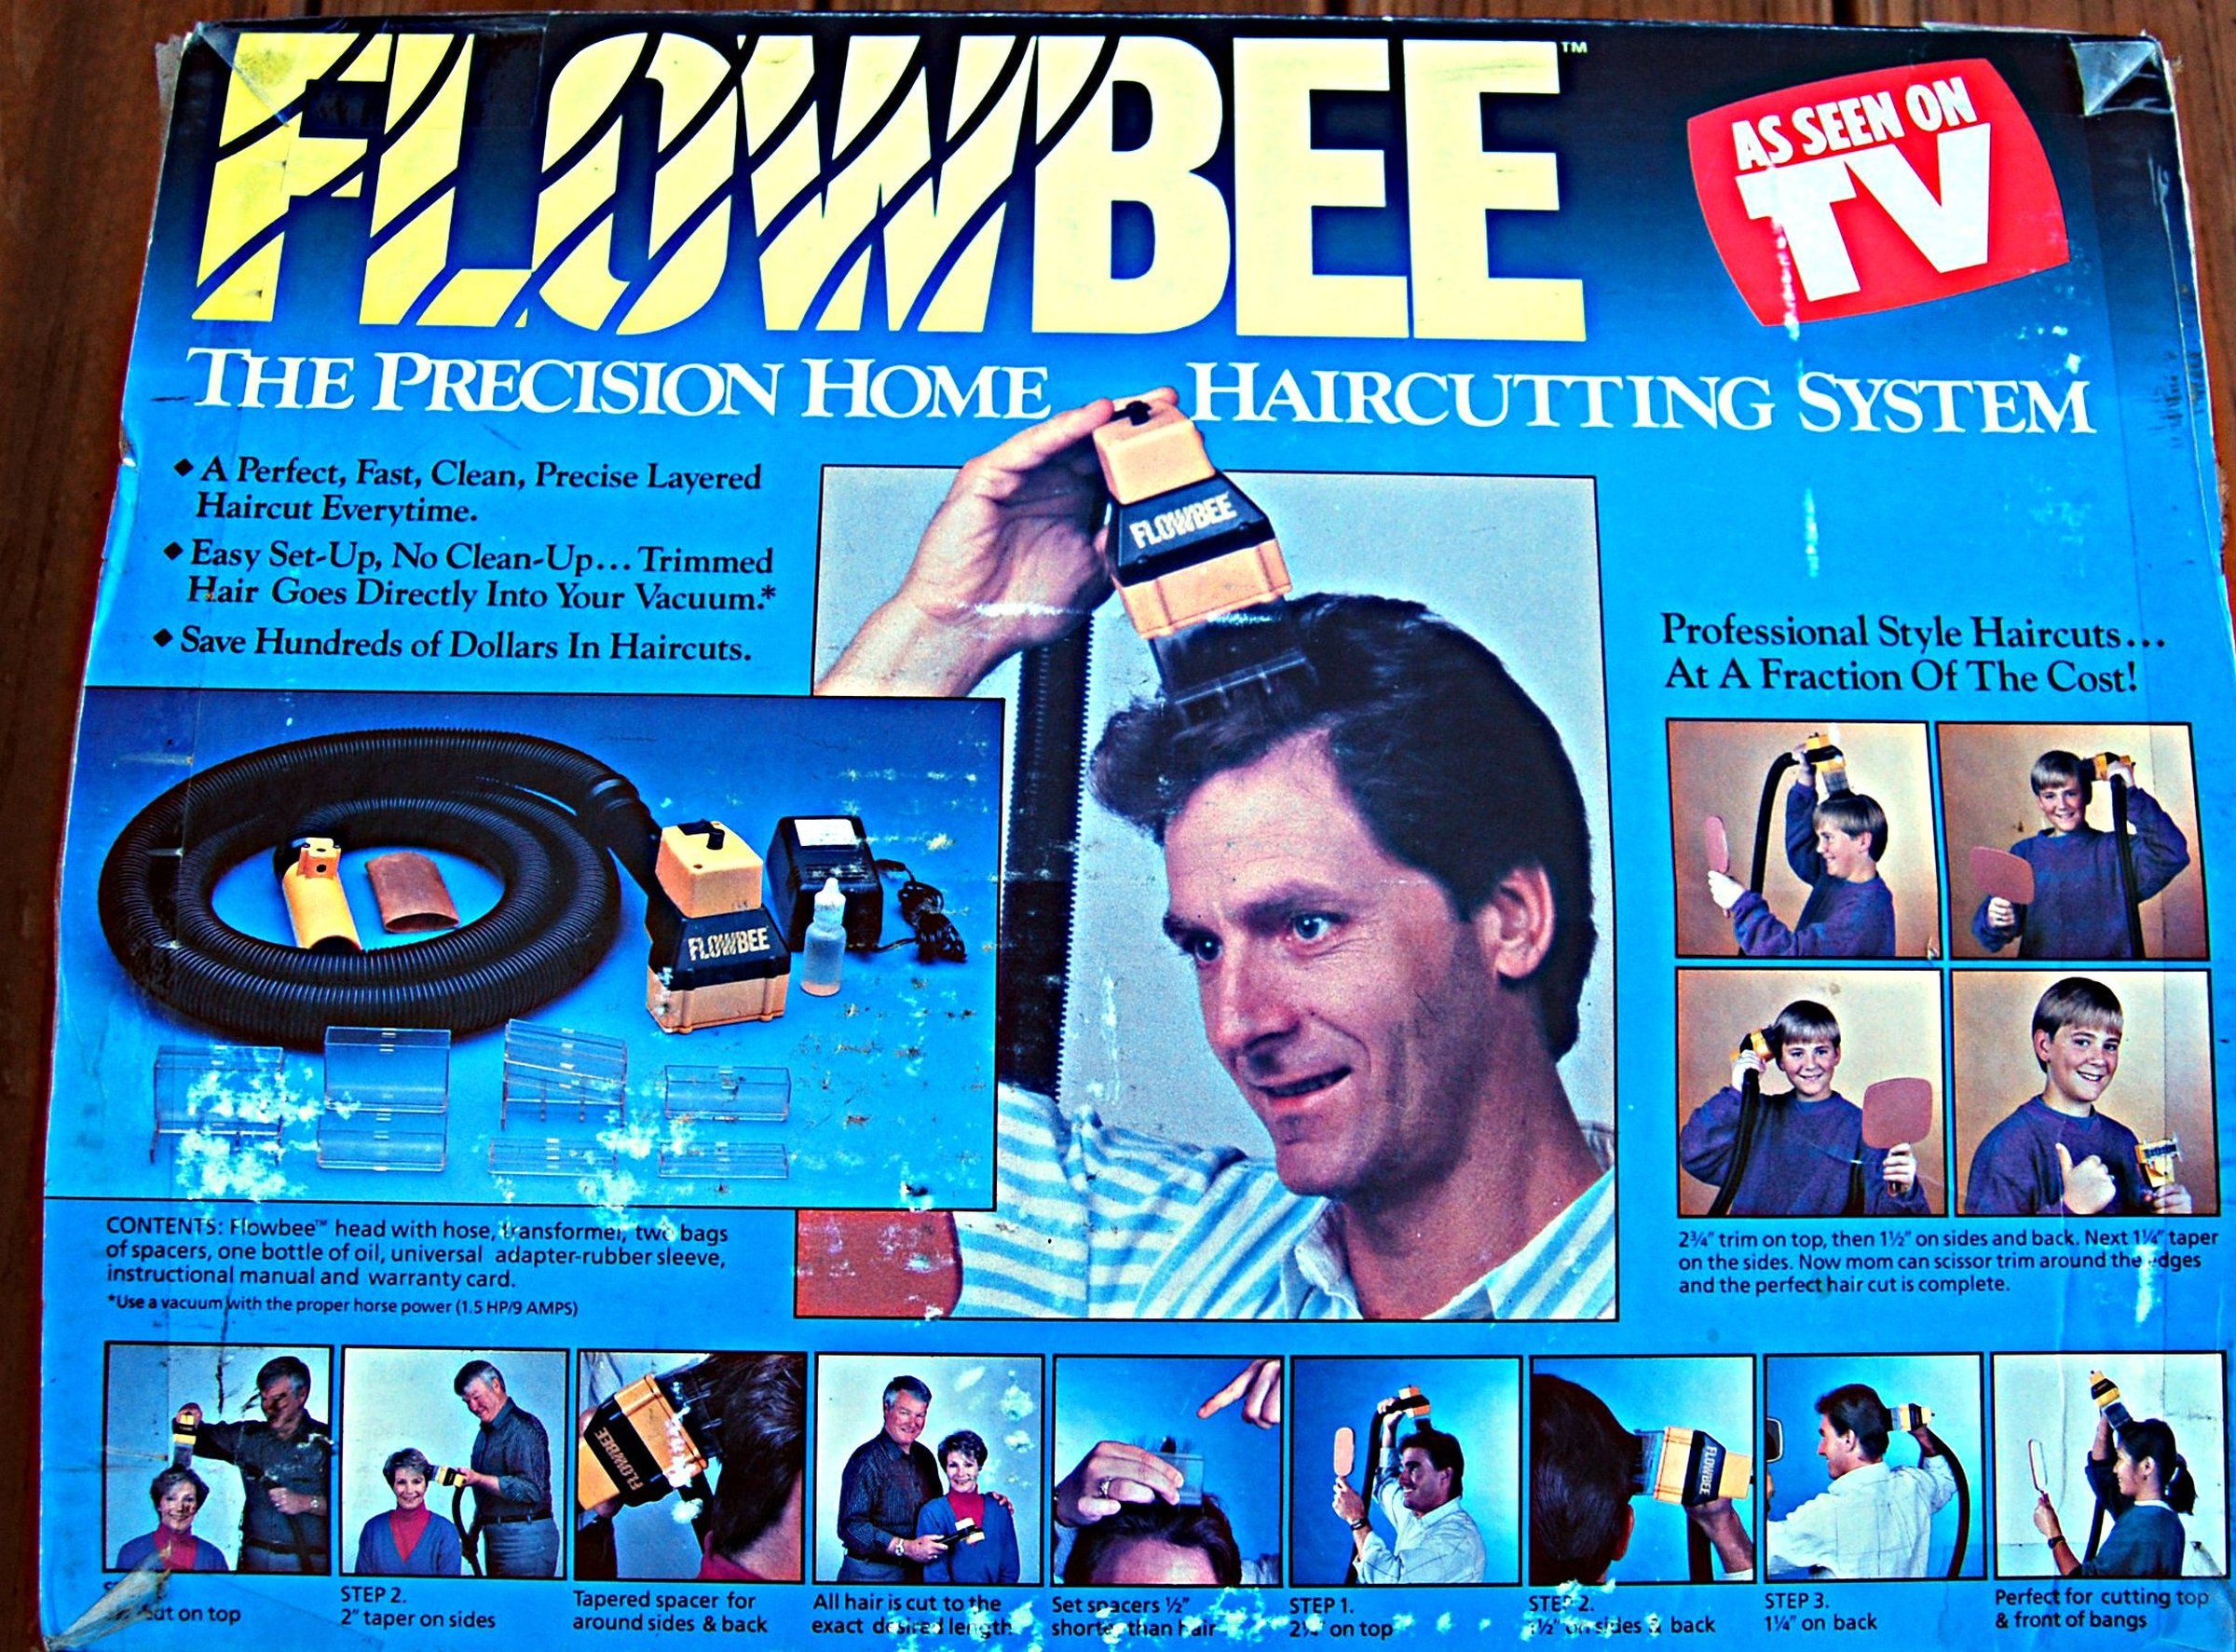 Yes, the Flowbee! The 1980s hair cutter that uses a vacuum cleaner